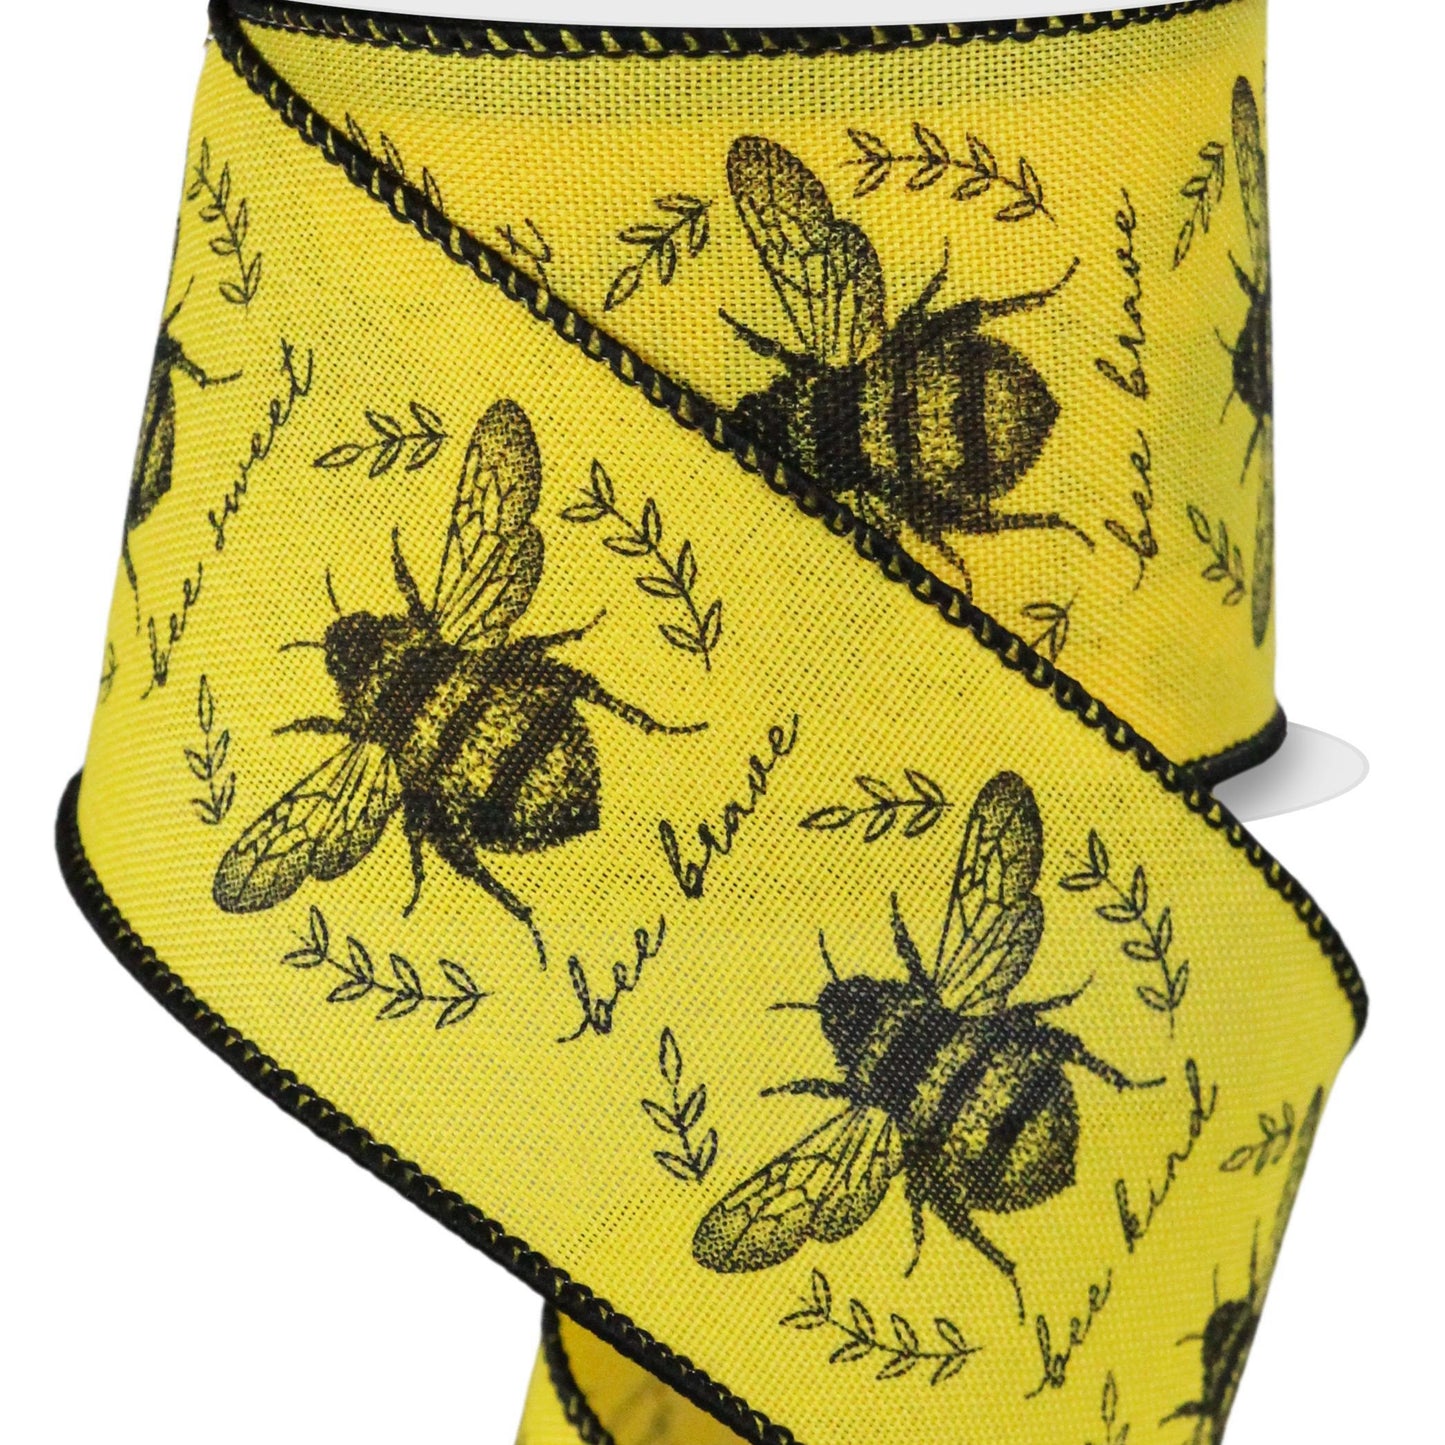 Wired Ribbon * Classic Honey Bee * Sun Yellow and Black Canvas * 2.5" x 10 Yards * RGE1747N6